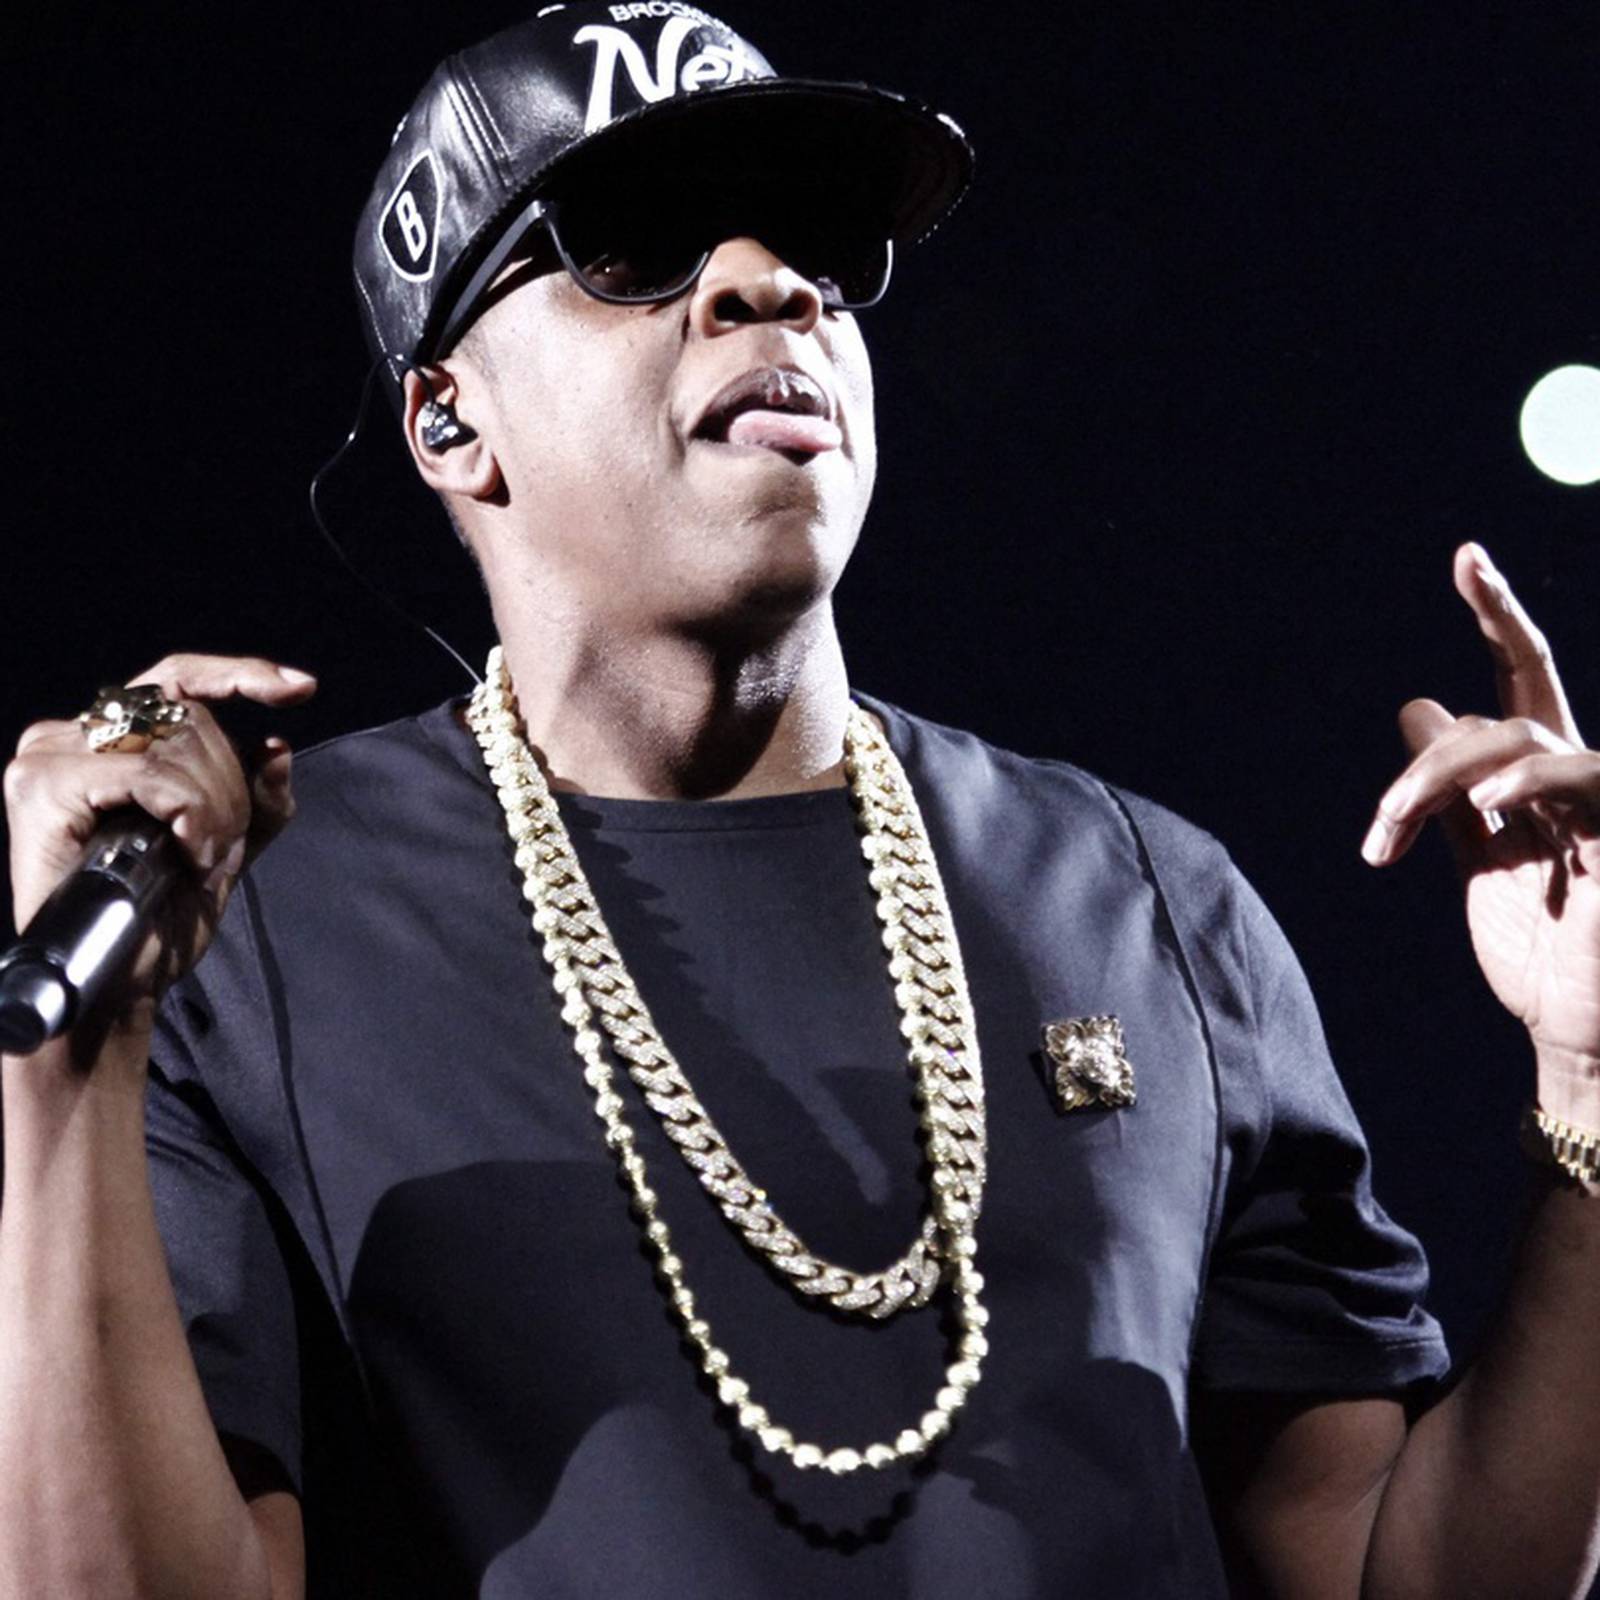 LVMH buys 50% stake in Jay-Z's Champagne brand